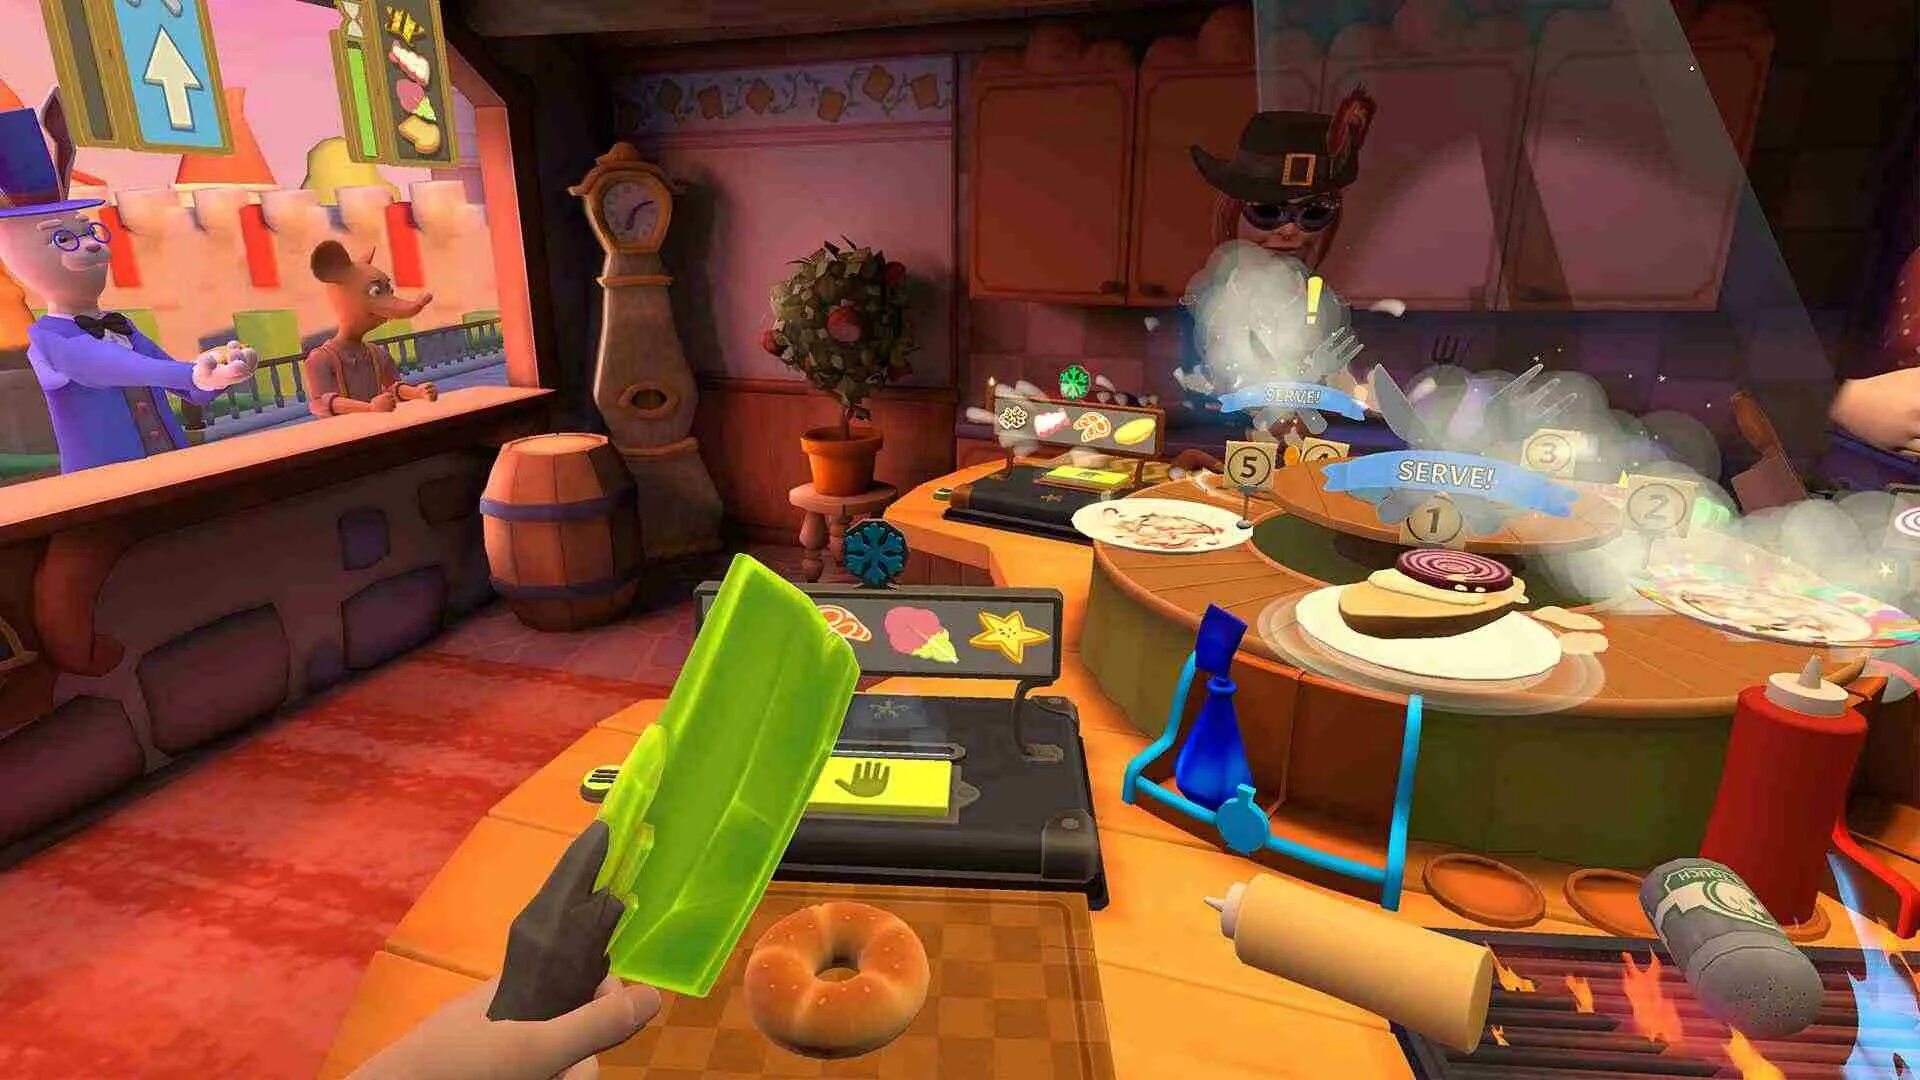 Игры quest 3 vr. Cook out игра. VR игры Quest 2. VR игры про готовку. Overcooked VR.